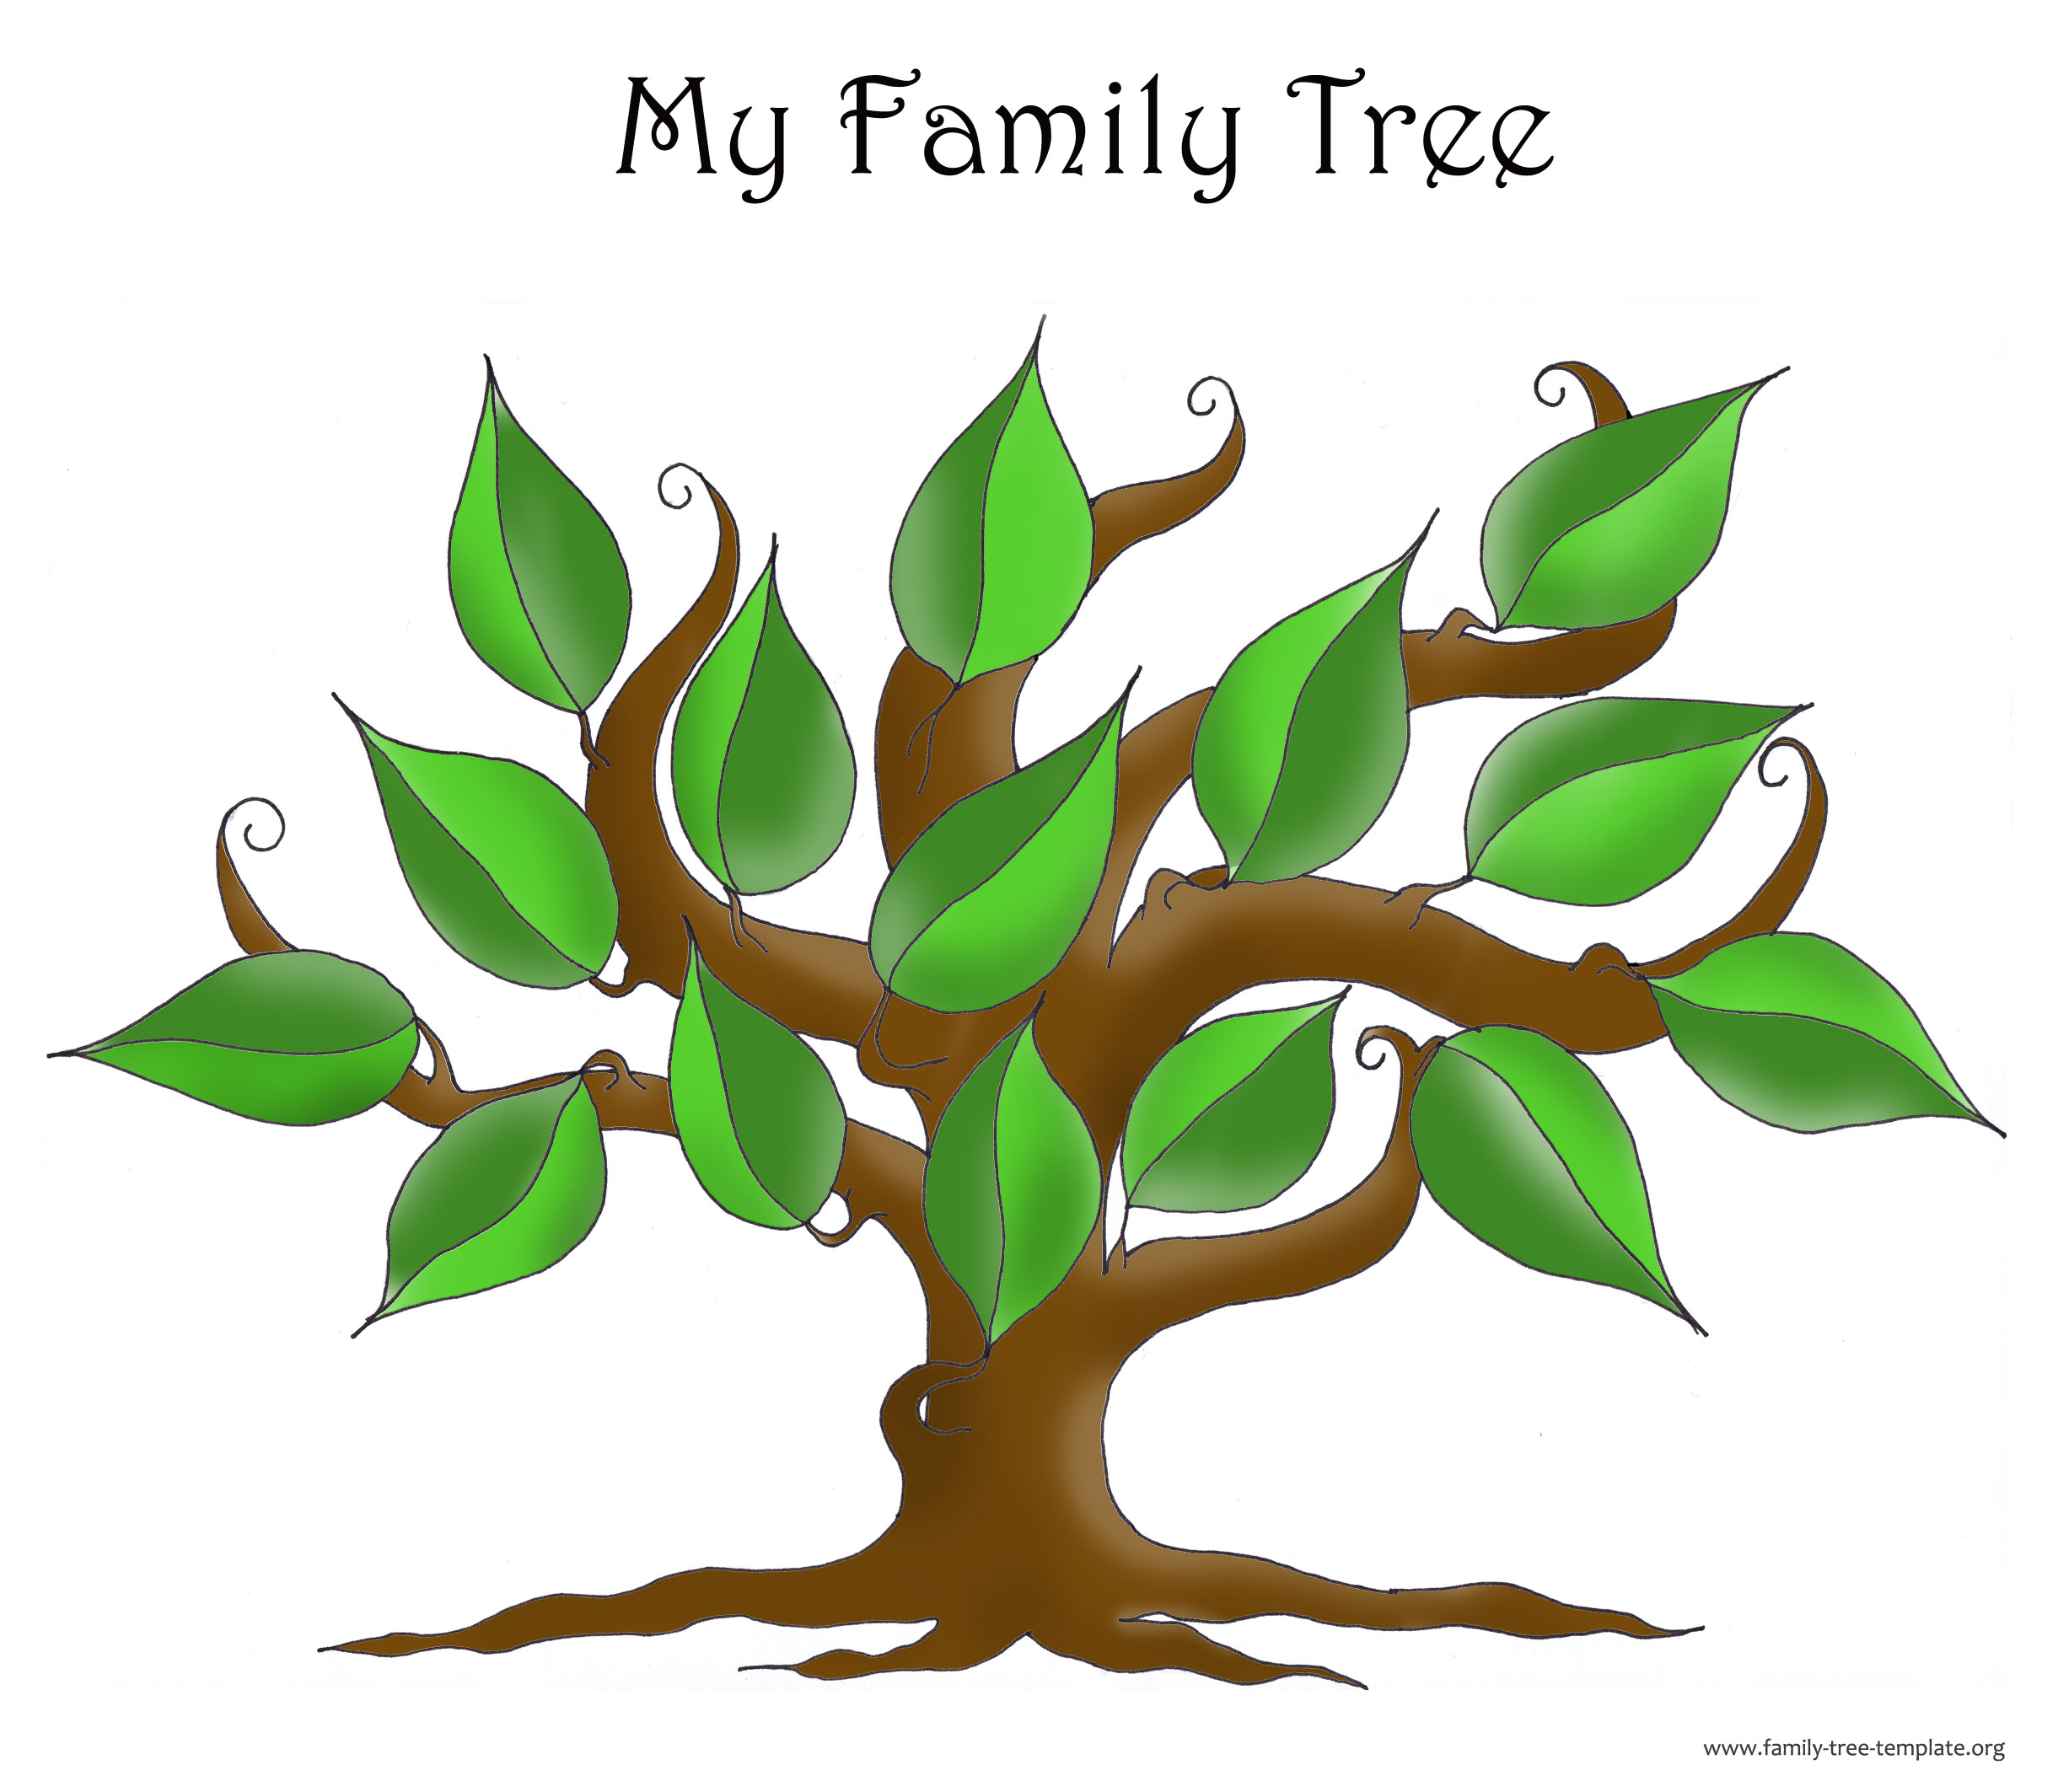 Genealogy tree with leaves so that you can plot in family members where you want to